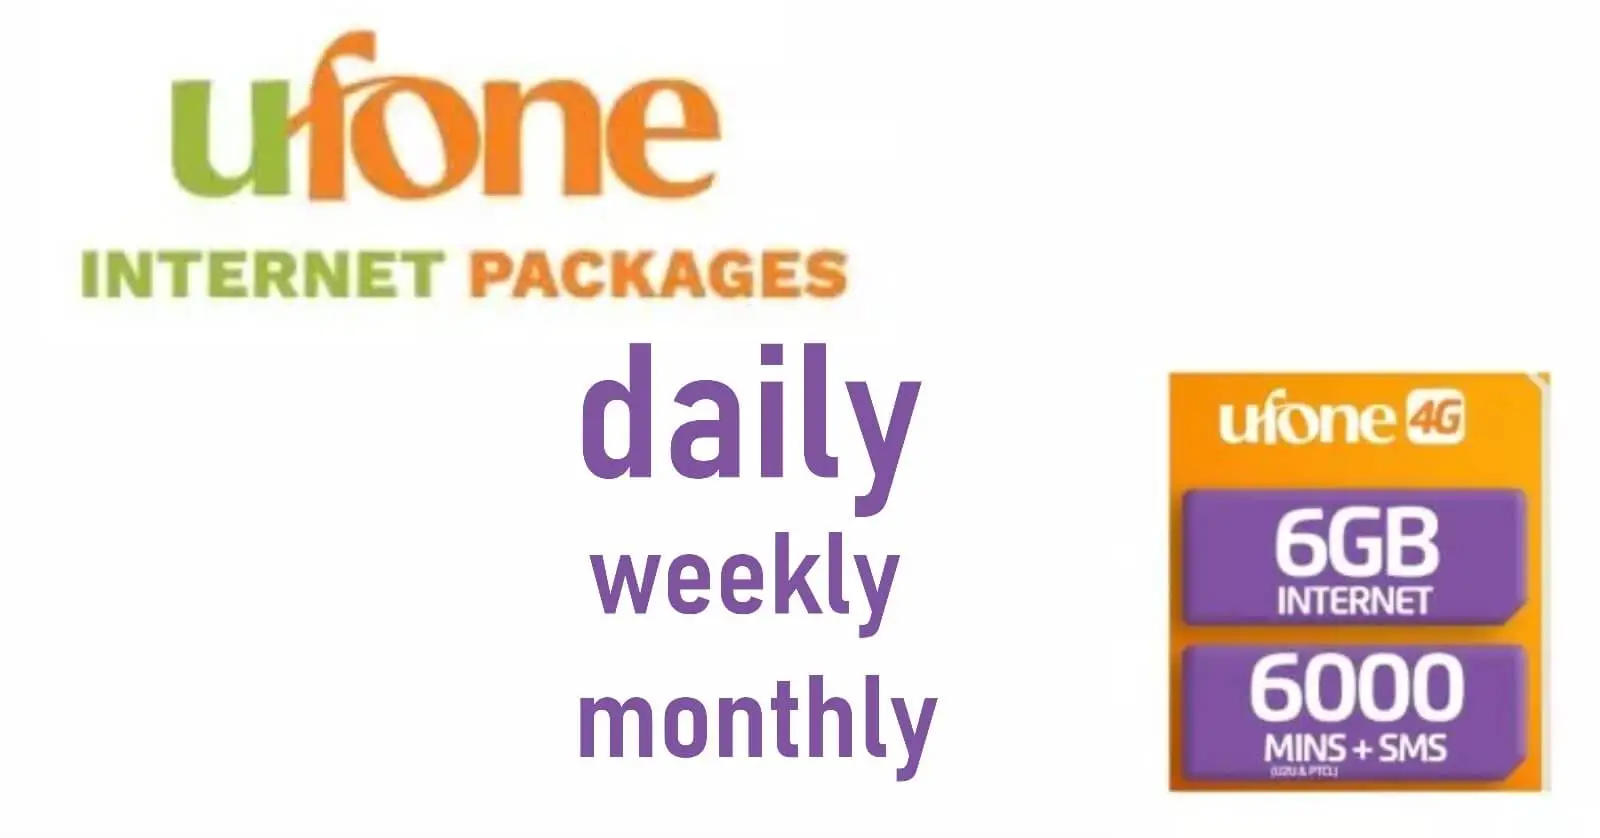 UFONE INTERNET PACKAGES